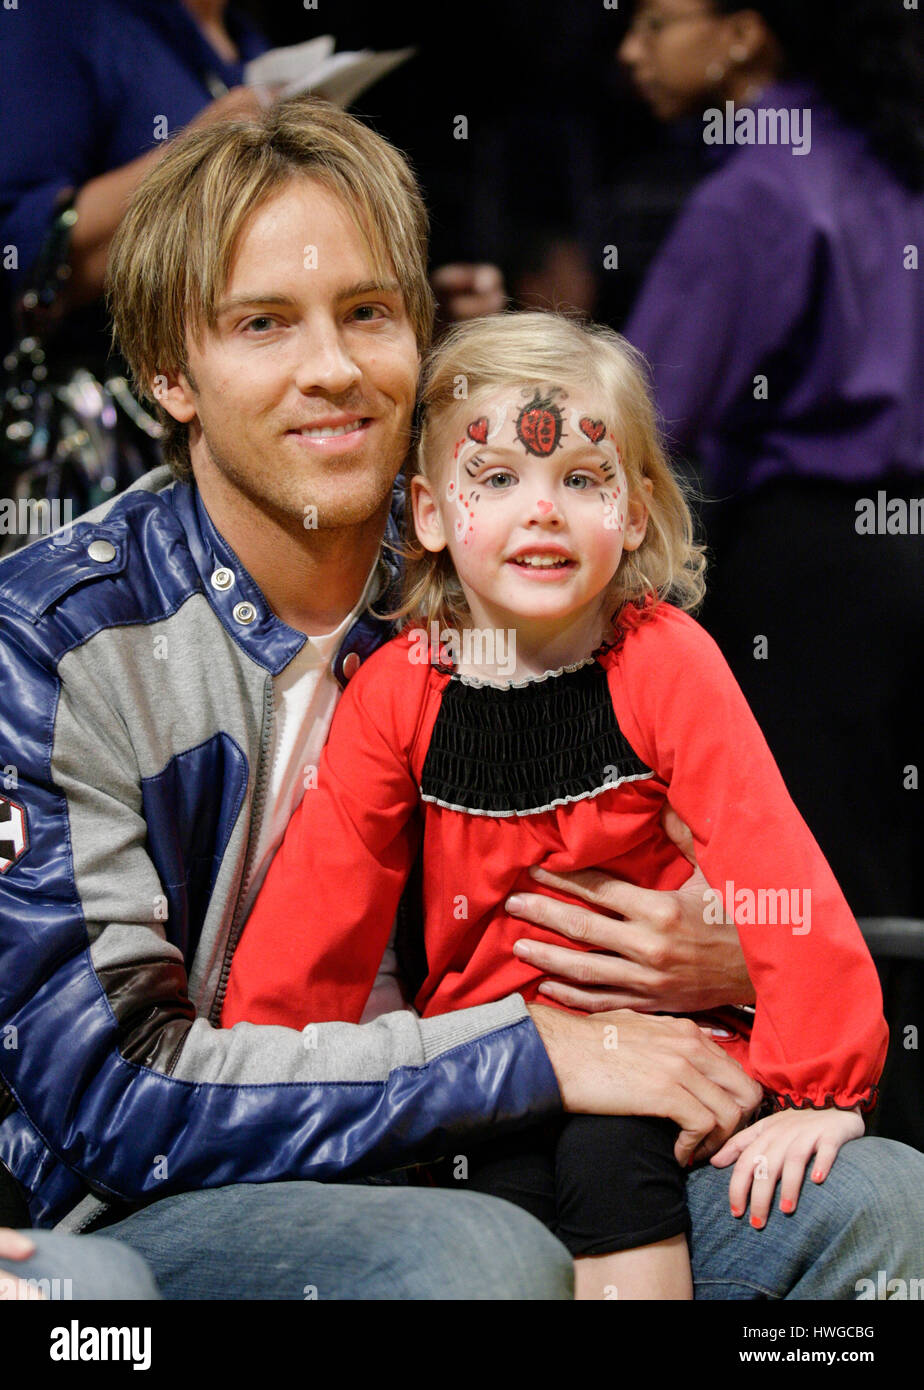 Larry Birkhead and daughter Dannielynn Birkhead in Los Angeles on November 8, 2009. Dannielynn Birkhead is also the daughter of Anna Nicole Smith. Stock Photo